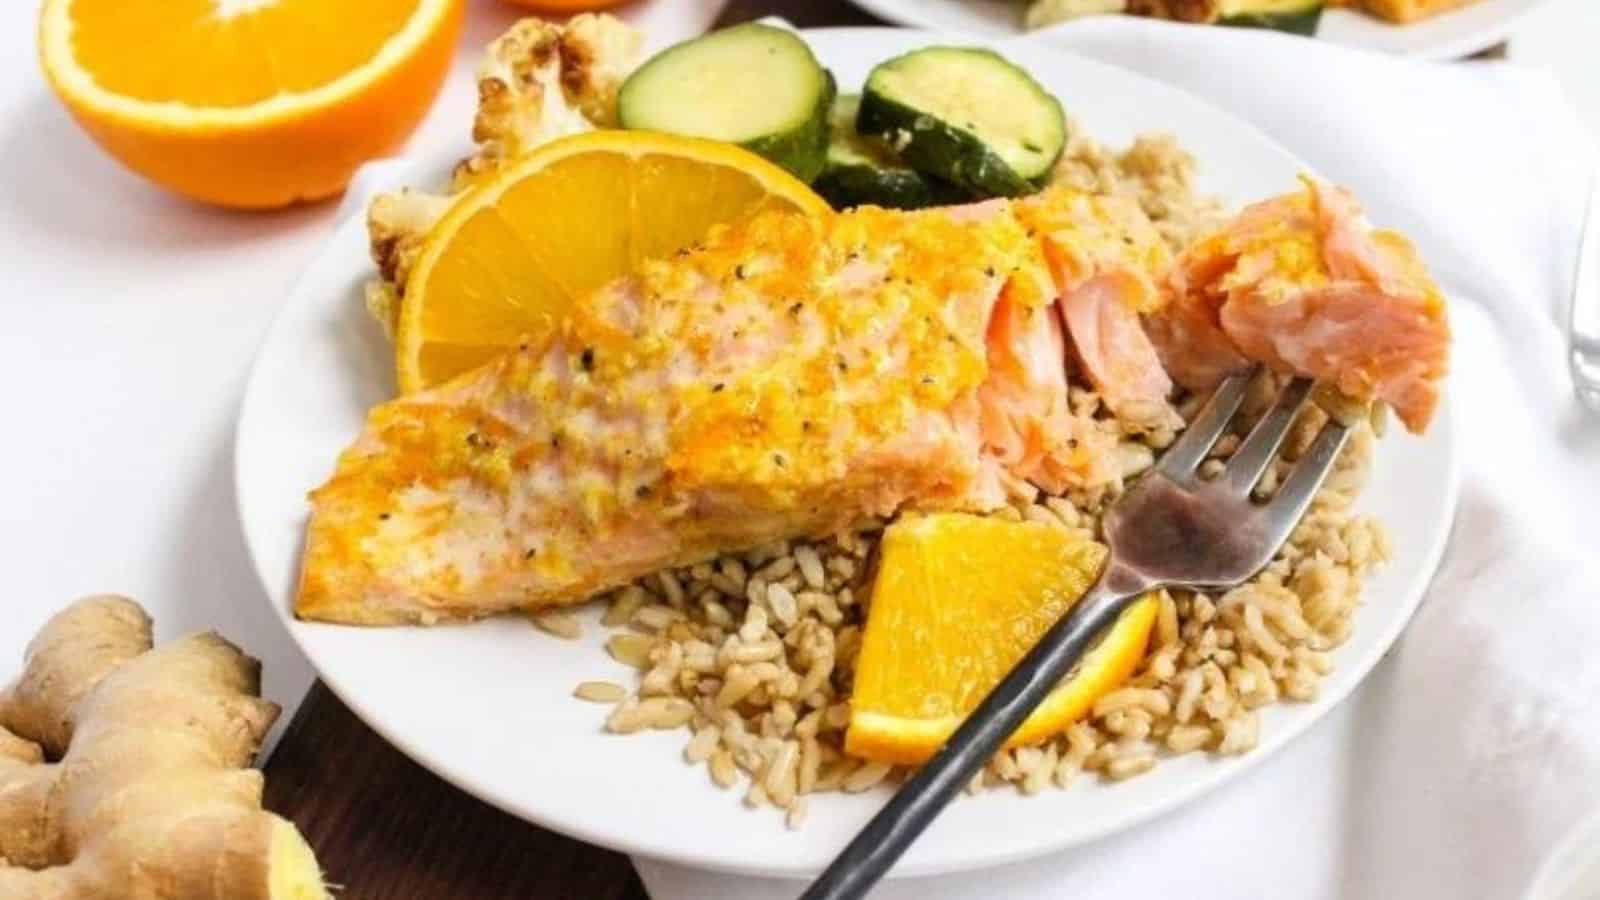 Flaky salmon topped with orange ginger glaze on a white plate with brown rice, roasted zucchini slices, and orange slices next to a fork.